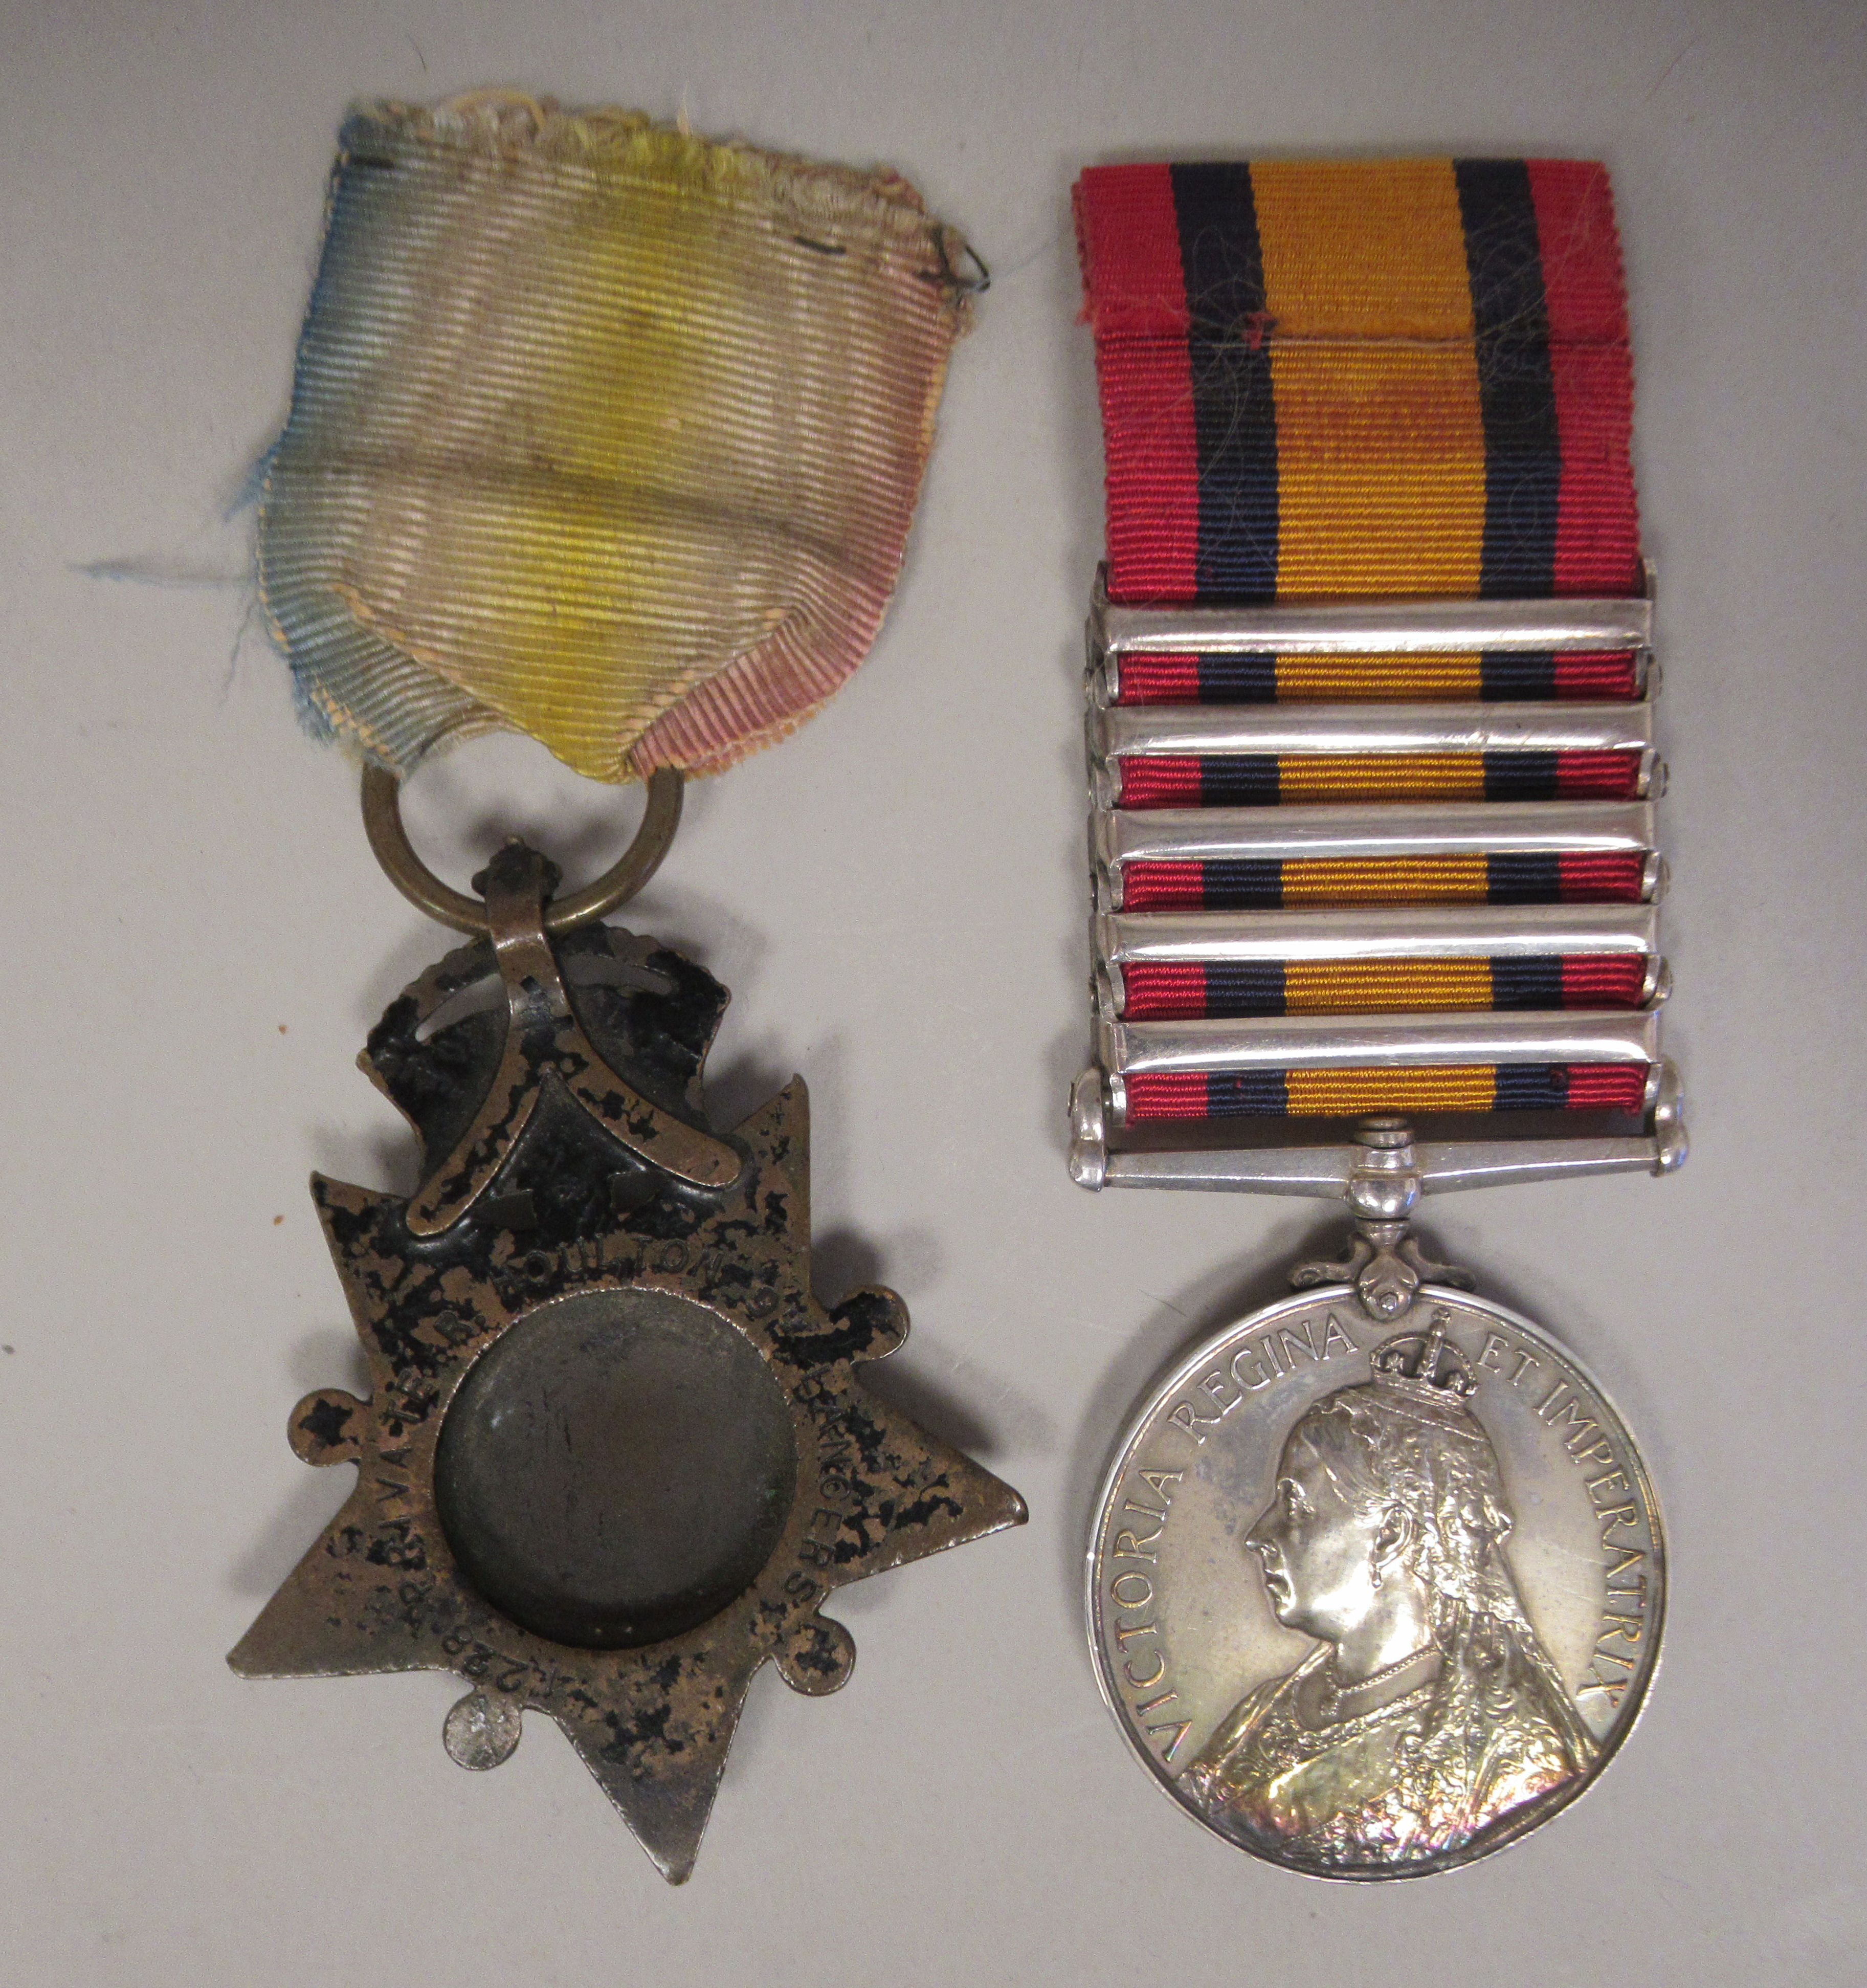 A Victoria South Africa medal, the monarch's profile portrait on the obverse with five bars on the - Image 2 of 3